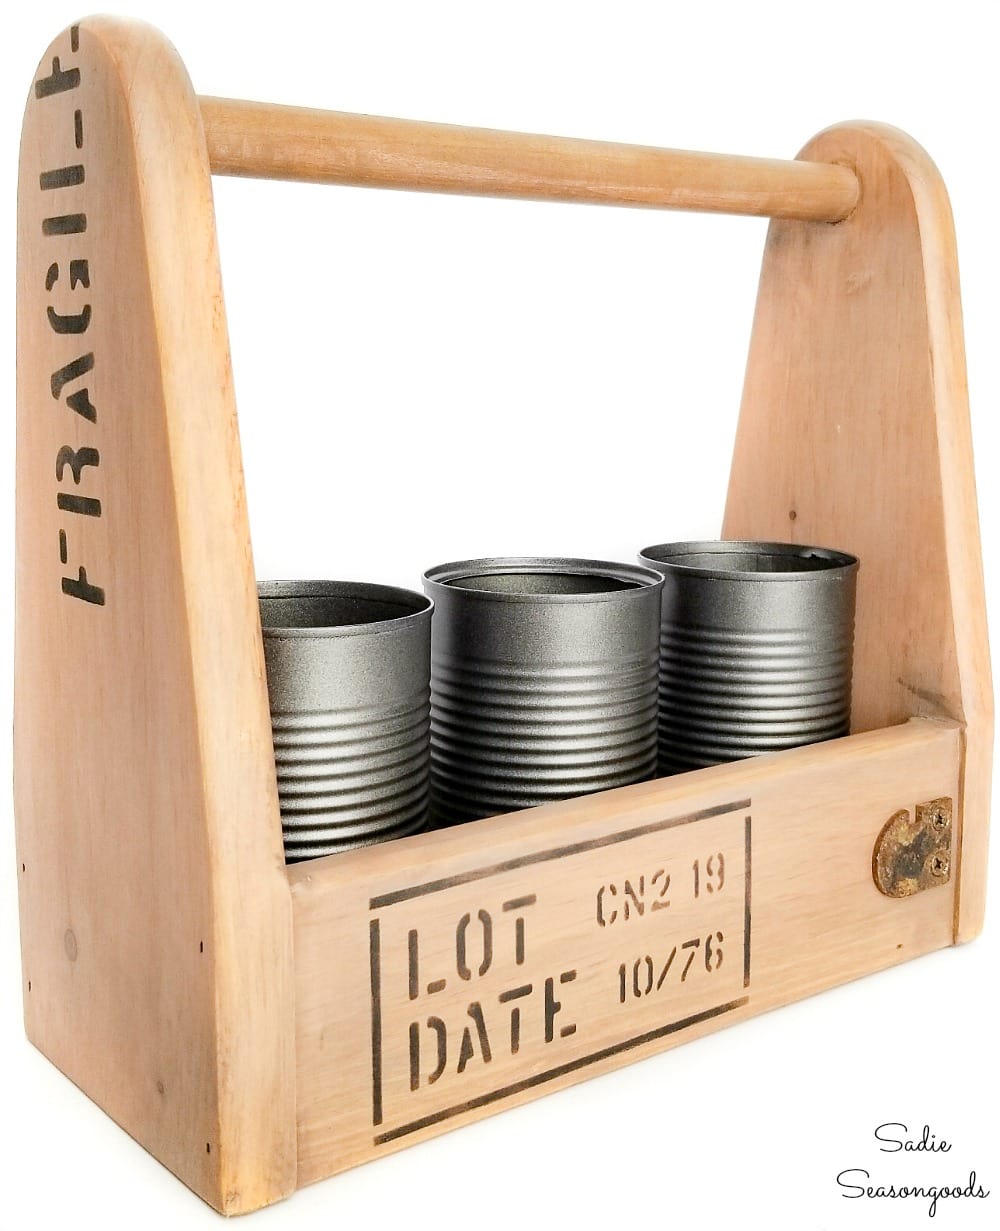 Upcycling the wooden tool caddies as industrial decor